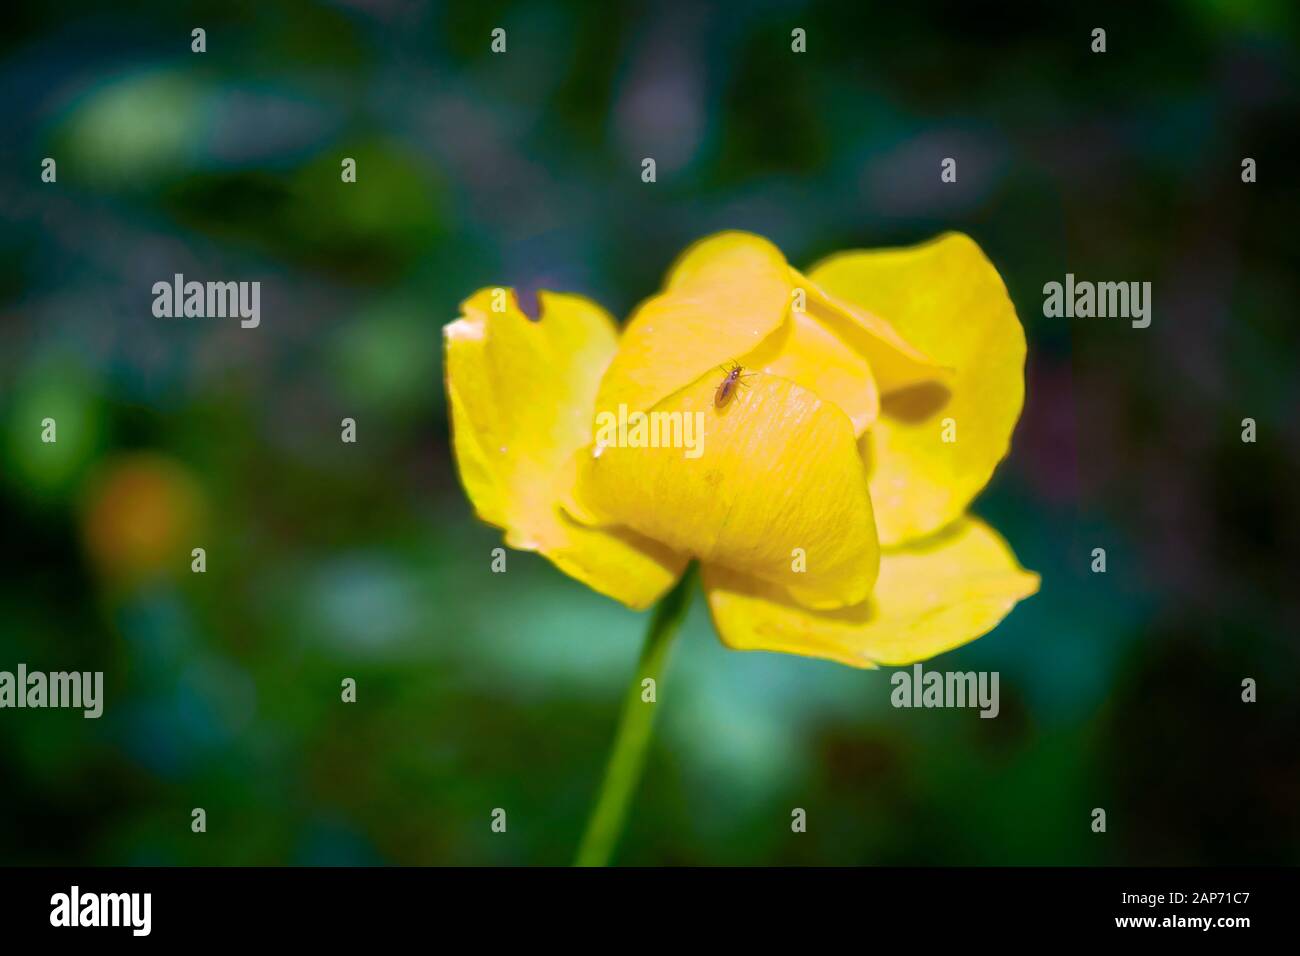 Spring flowers on a blurred background. The globeflower. Yellow flowers Trollius. Stock Photo